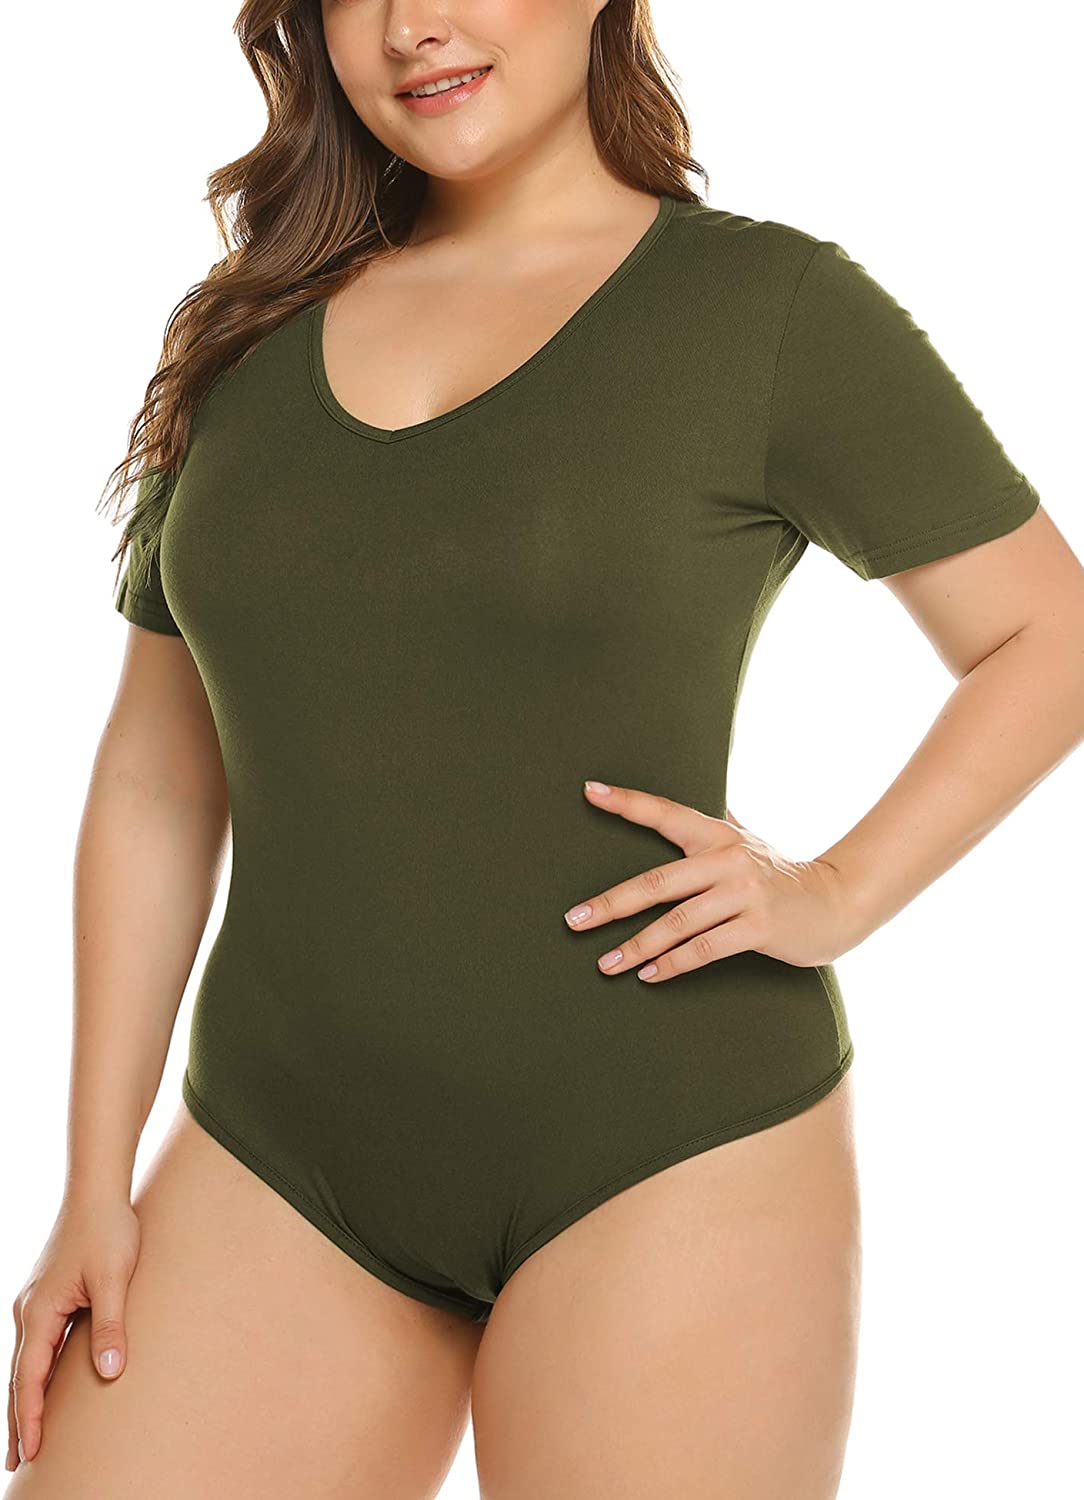 IN'VOLAND Womens Plus Size Bodysuit Long Sleeve Stretchy Leotard Scoop Neck  Top Tees at  Women's Clothing store